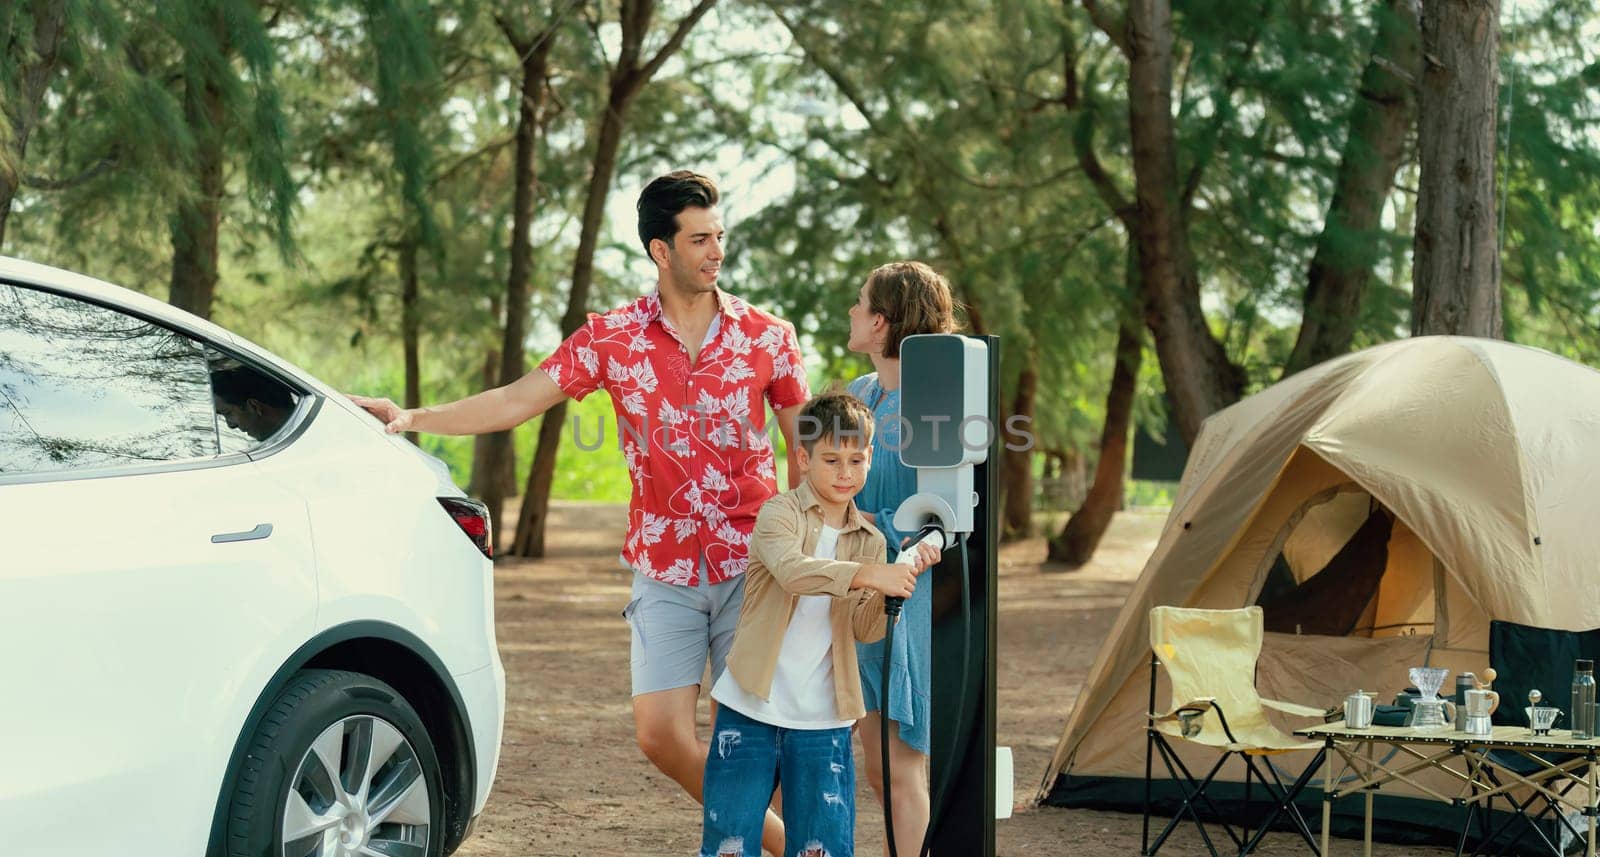 Lovely family recharge EV car with EV charging station in campsite. Perpetual by biancoblue